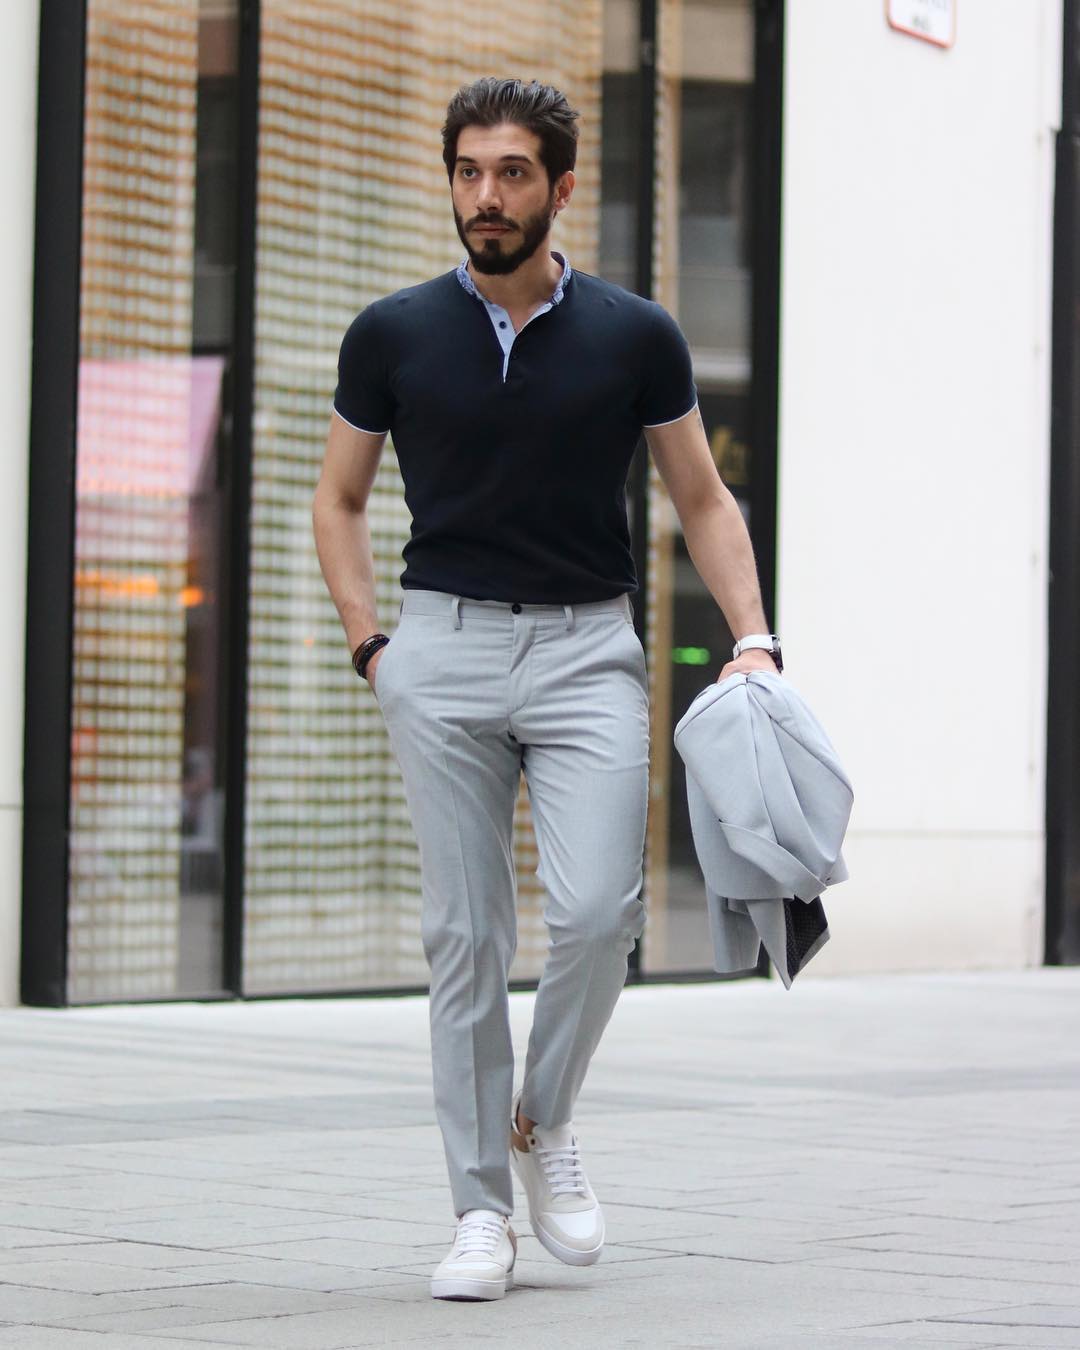 5 Pants & T-shirt Outfits For Men #casualstyle #mensfashion #pantsandtshirt #streetstyle